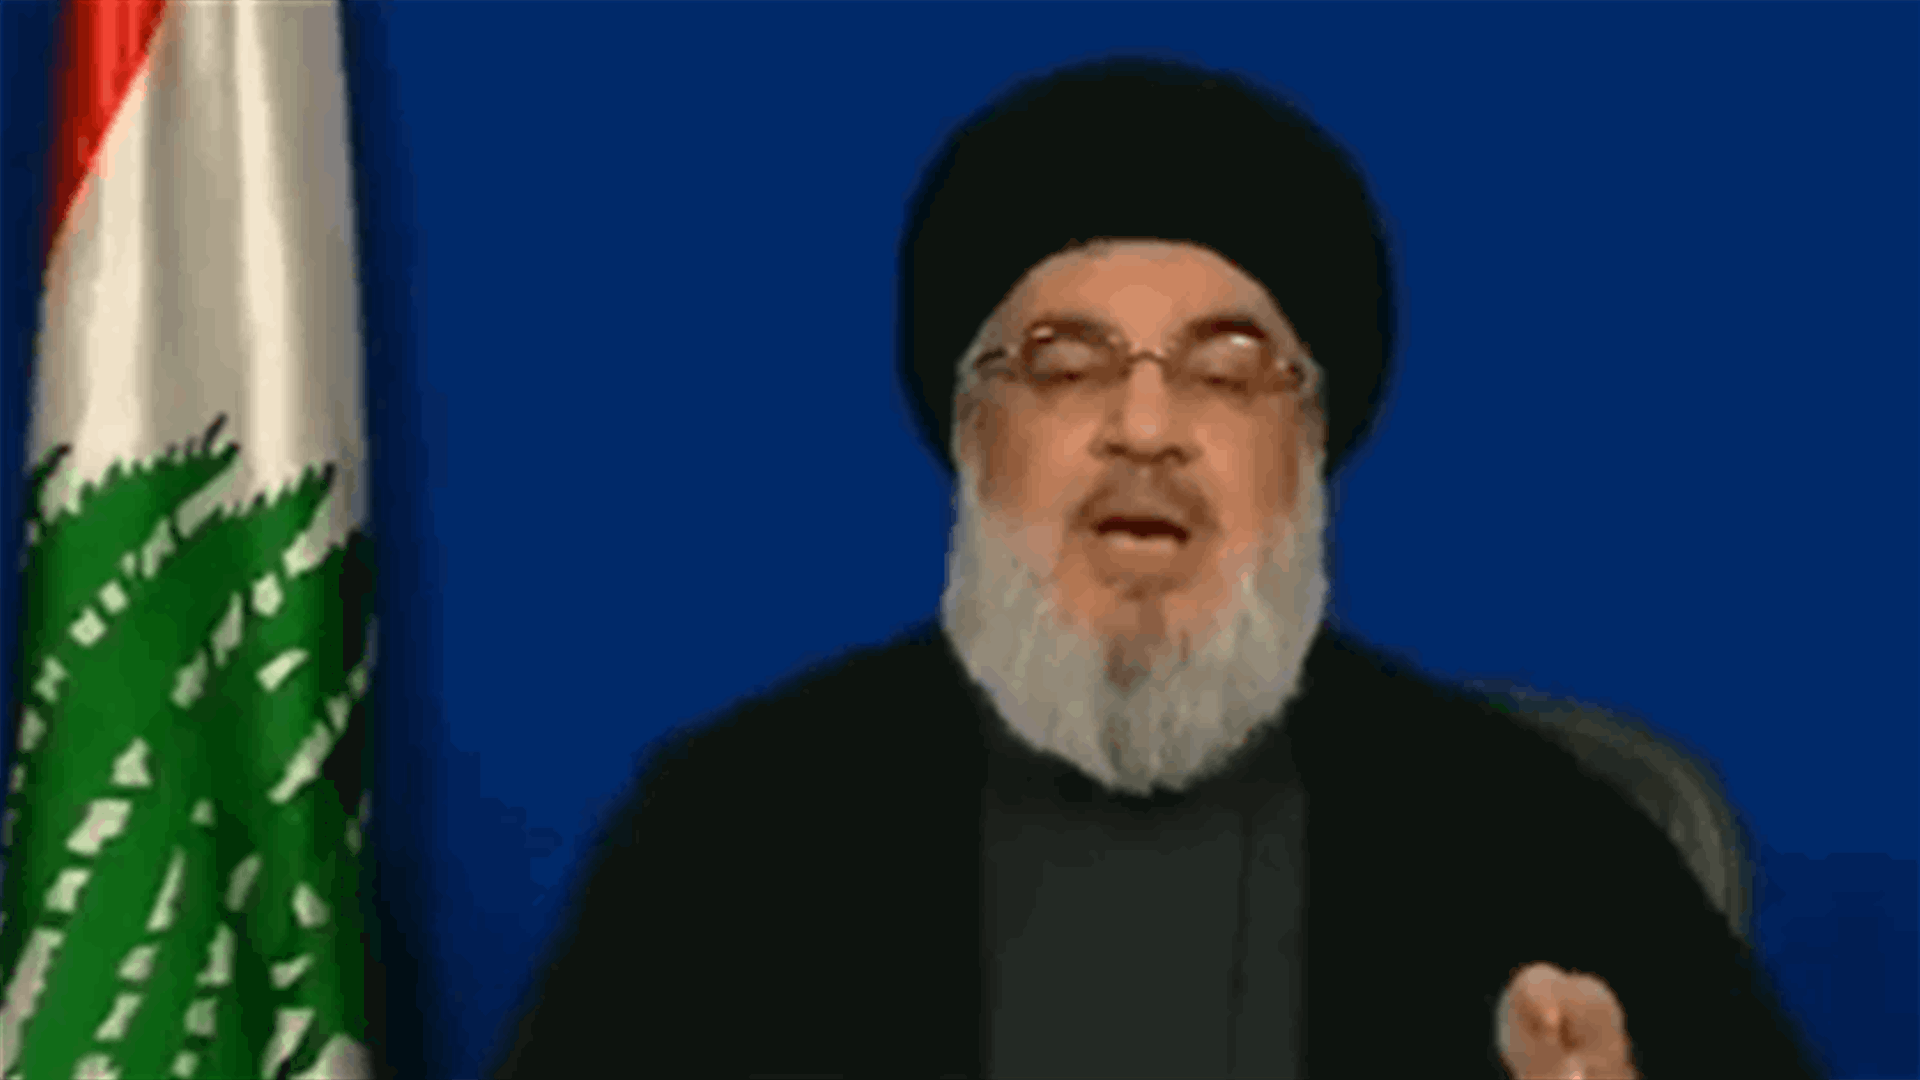 Nasrallah: Power vacuum could lead to chaos and collapse